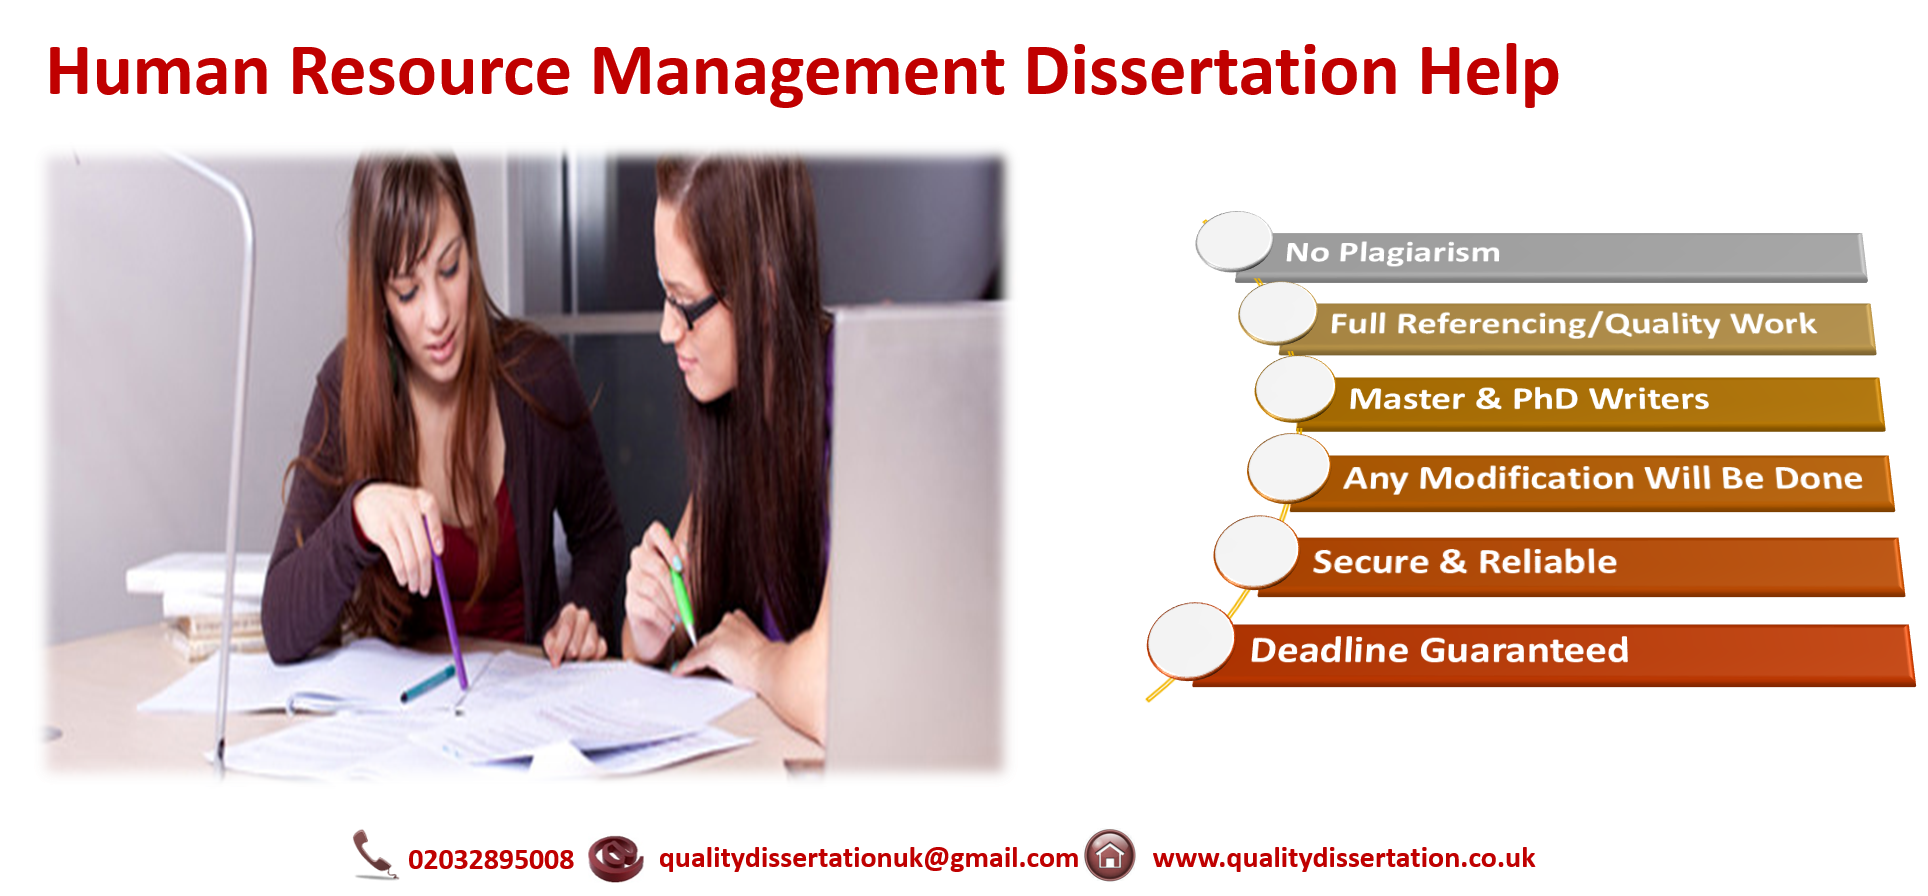 Best website to purchase an it management dissertation 66 pages American MLA